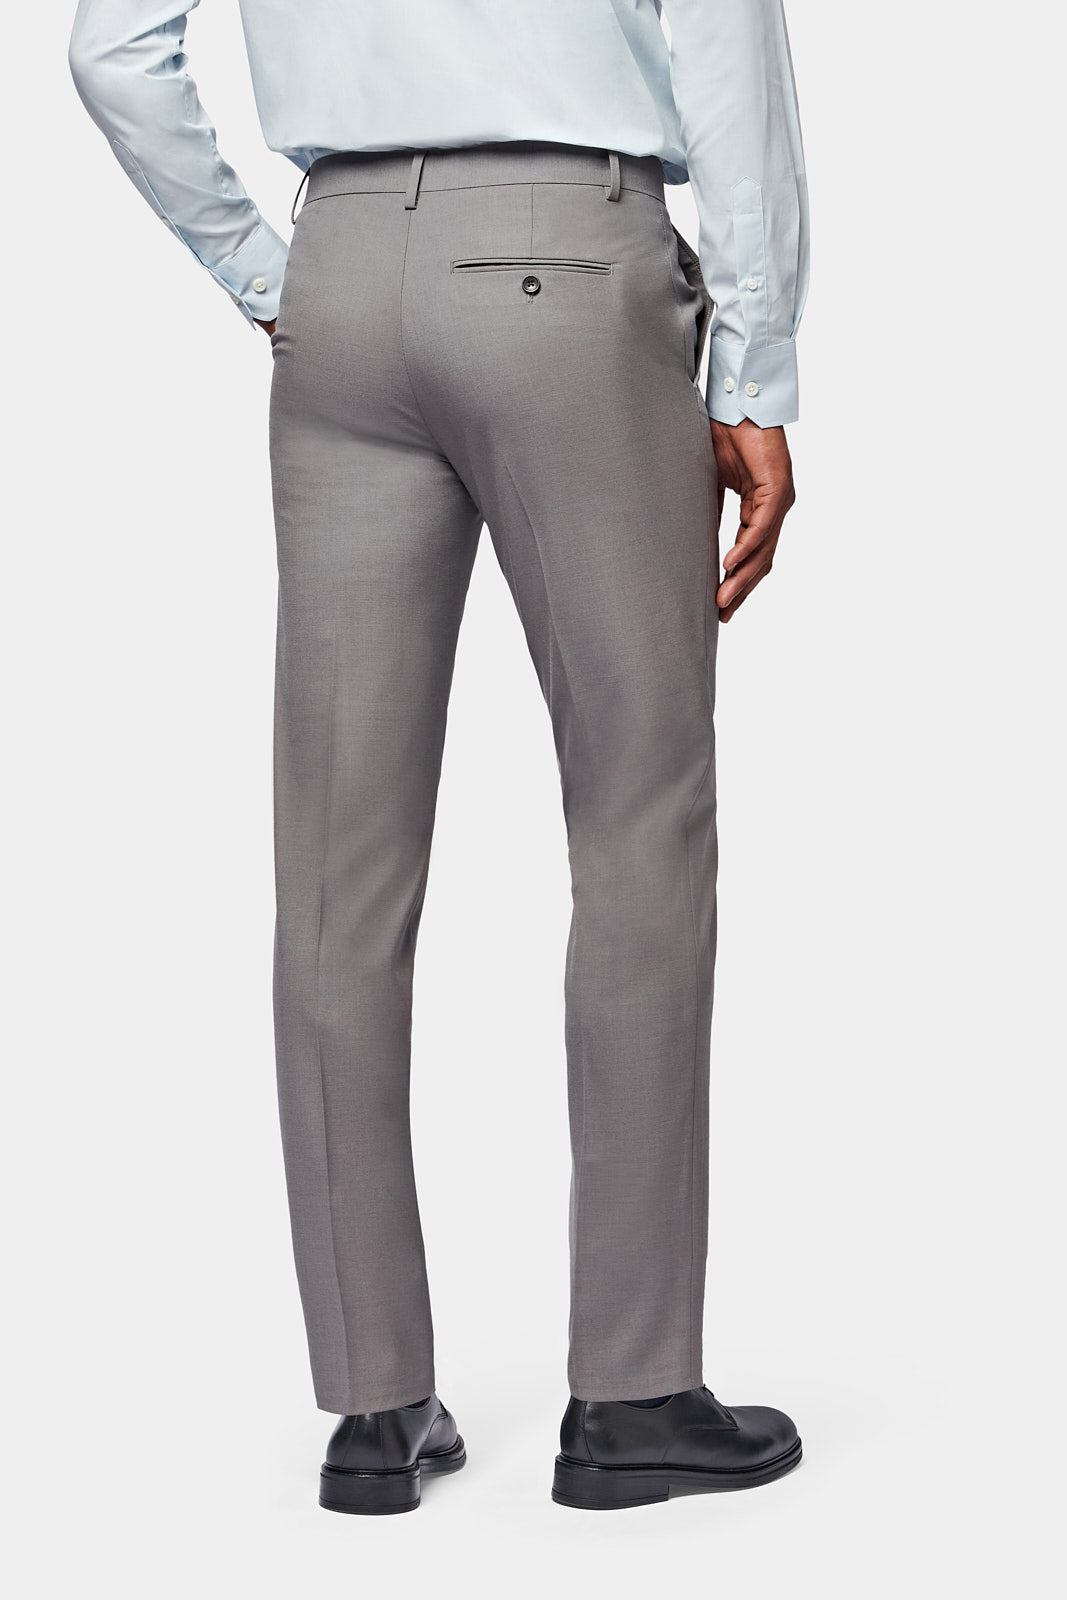 Buy Charcoal Grey Trousers & Pants for Men by NETWORK Online | Ajio.com